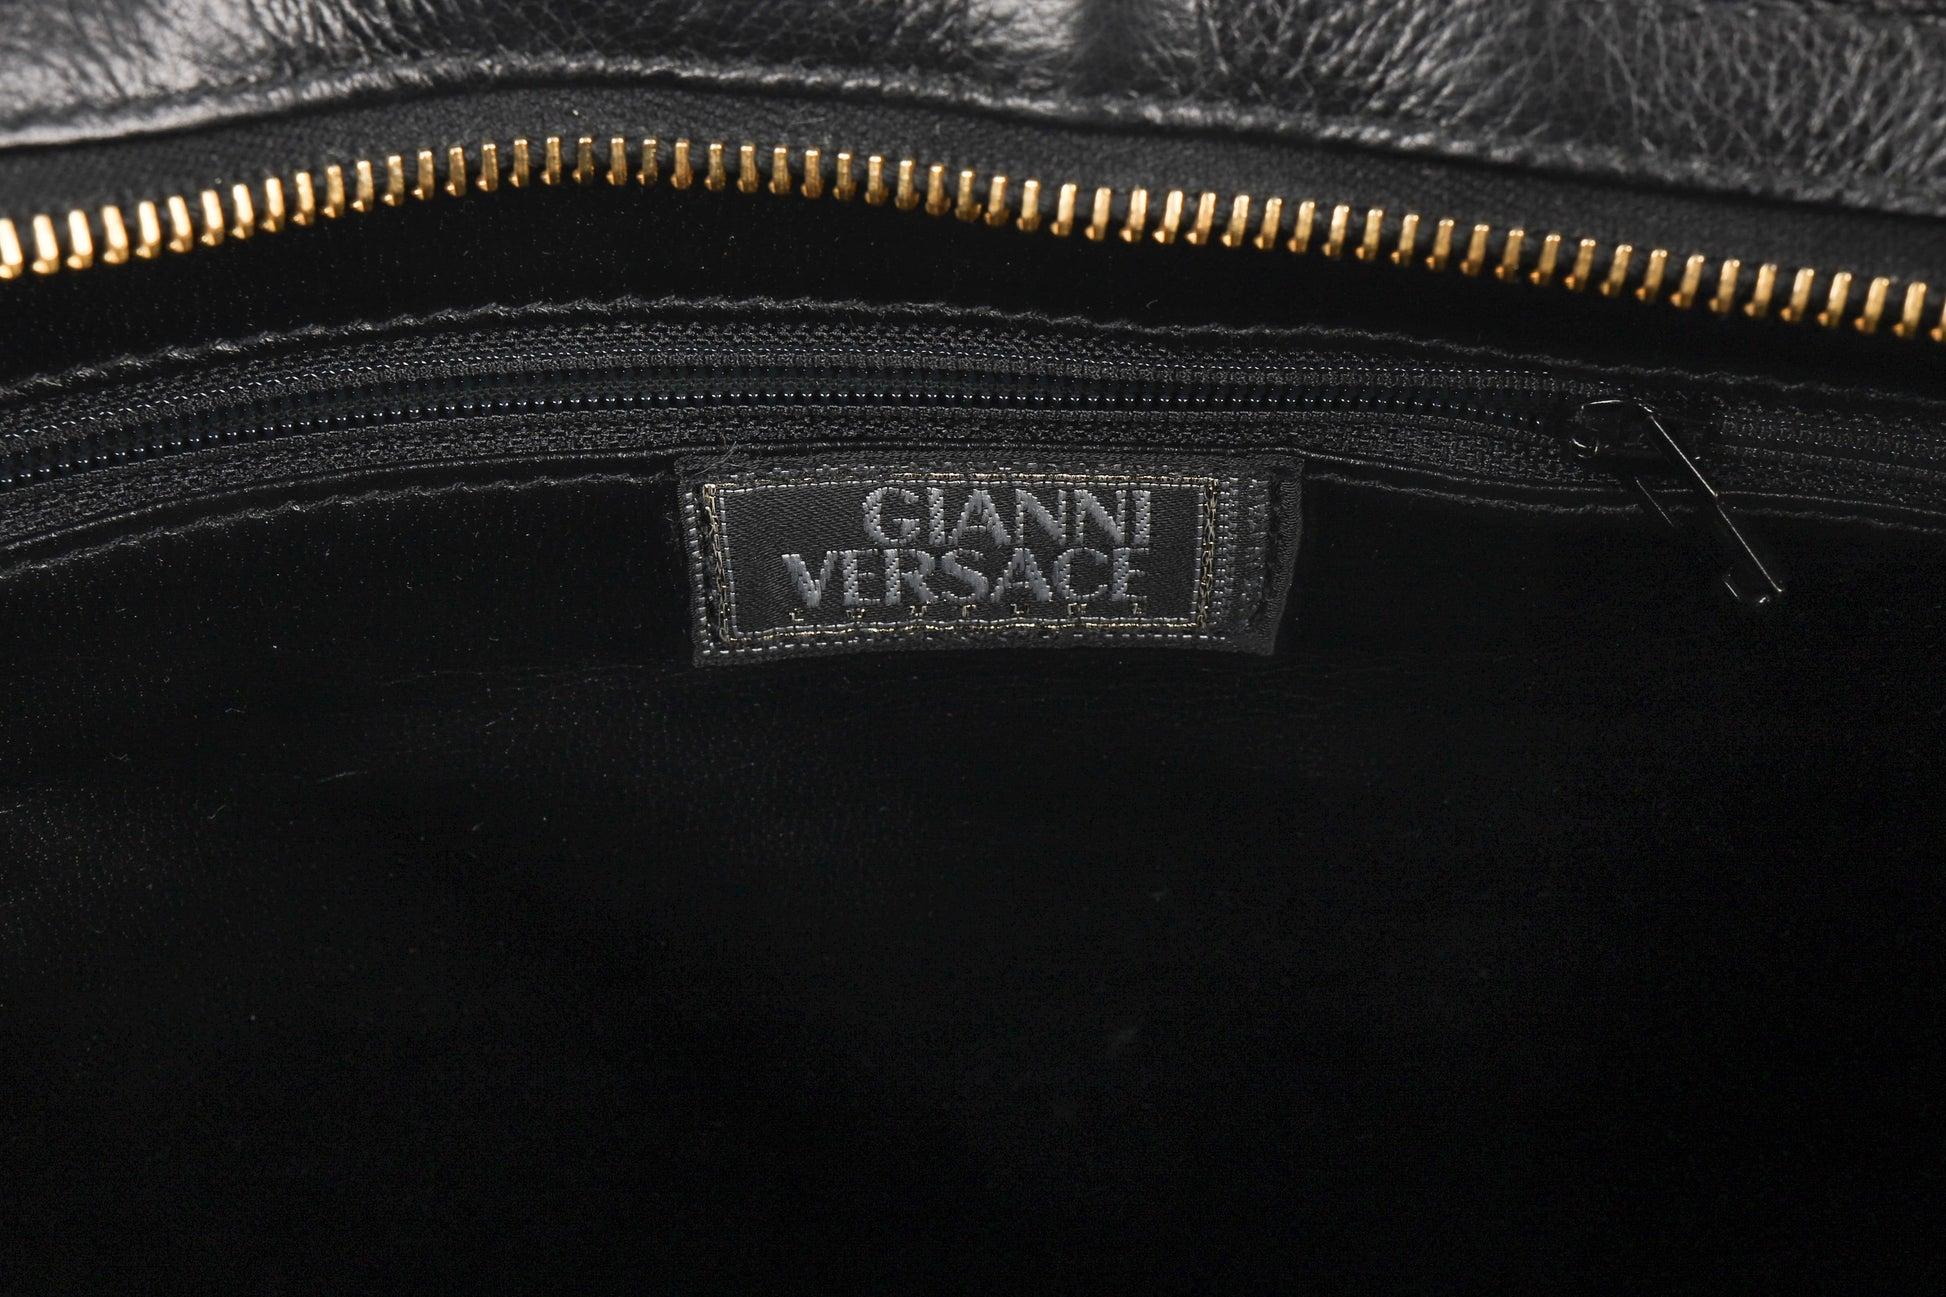 Gianni Versace Black Leather Bag with Golden Metal Elements For Sale 4